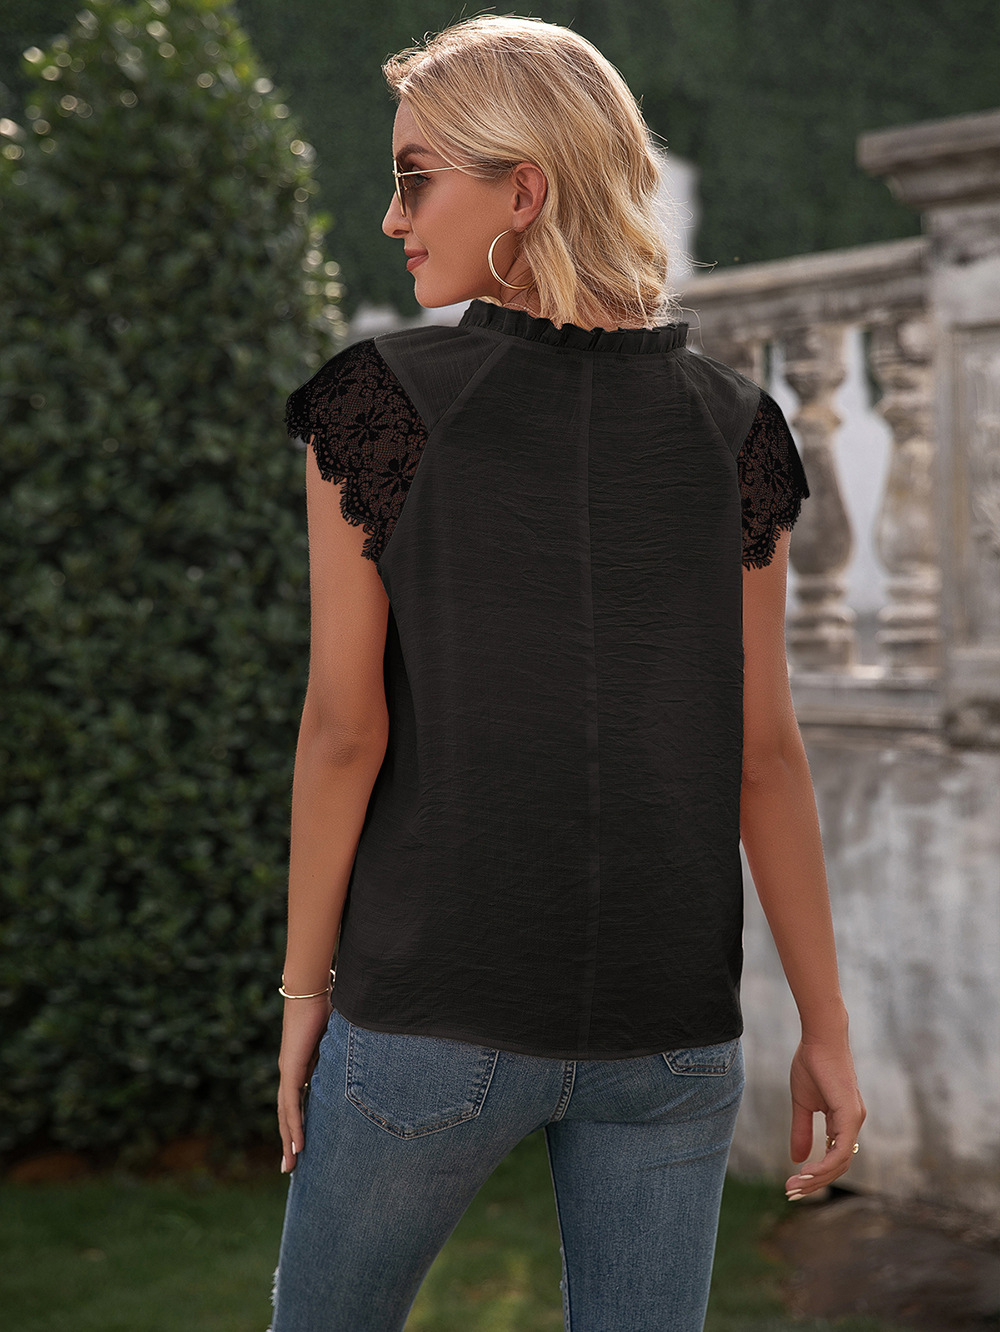 stitching fungus edge v neck lace-up solid color lace top NSYBL120691